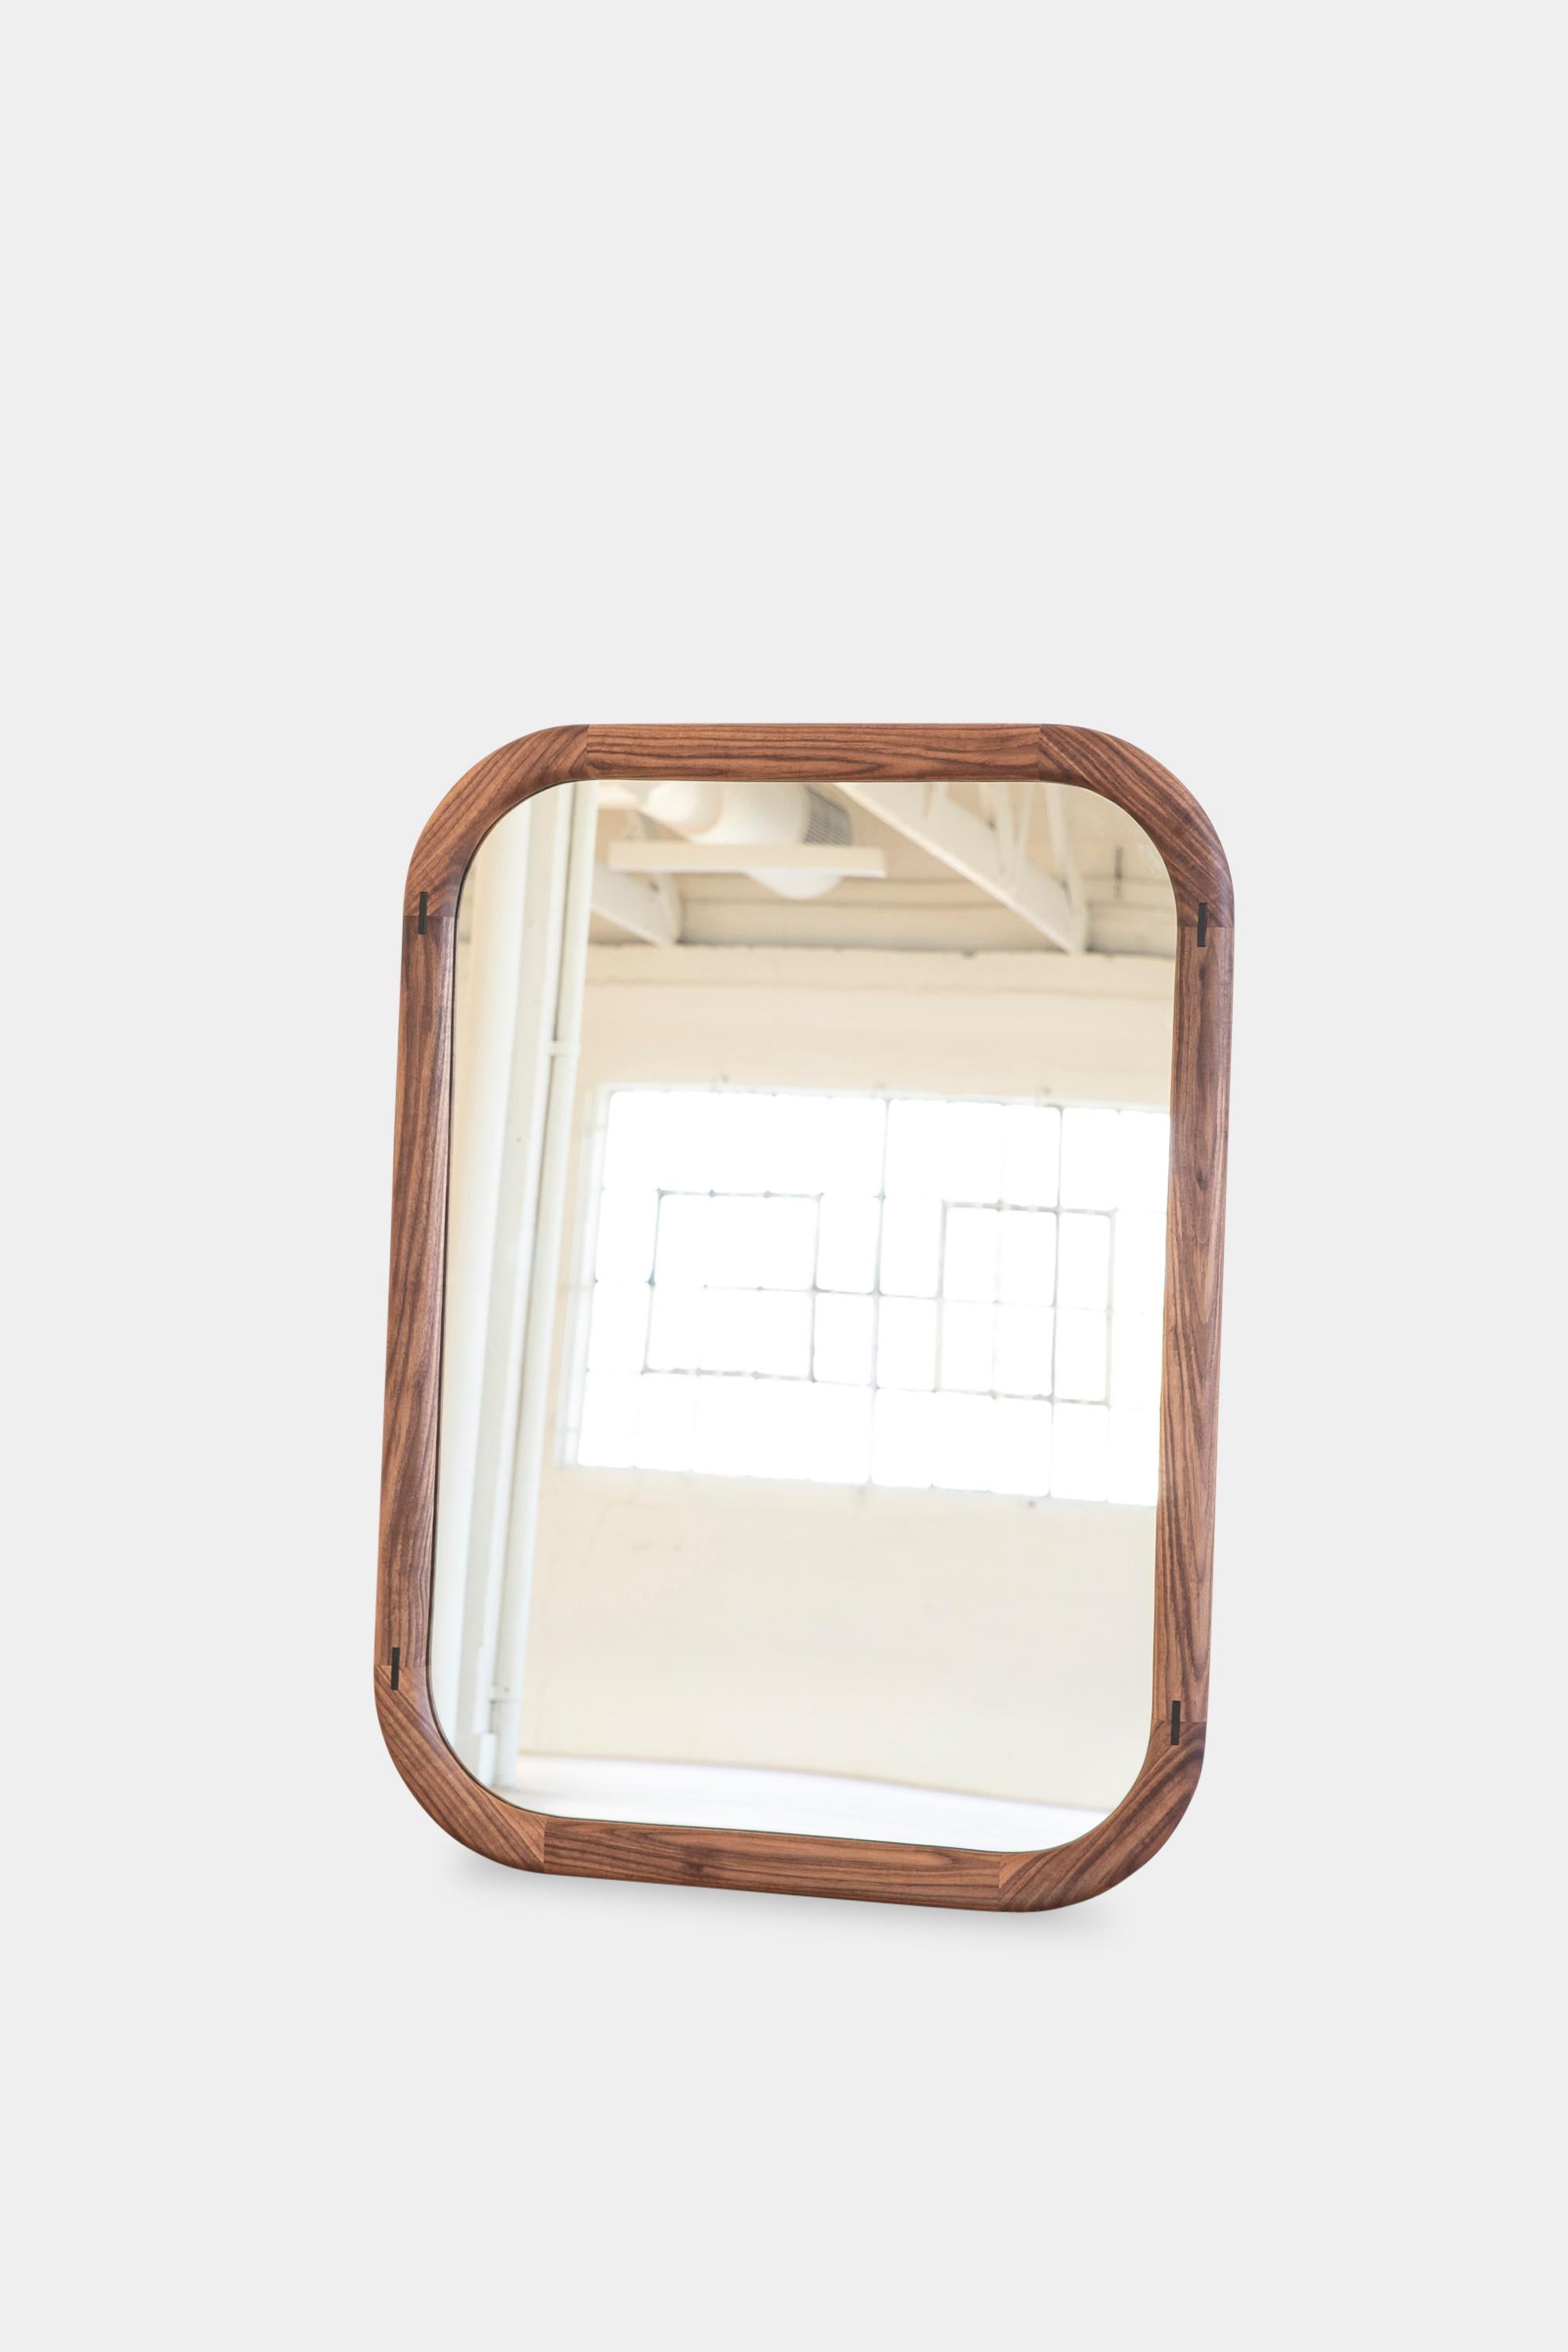 North American Earl Hand Crafted Solid Walnut Mirror For Sale